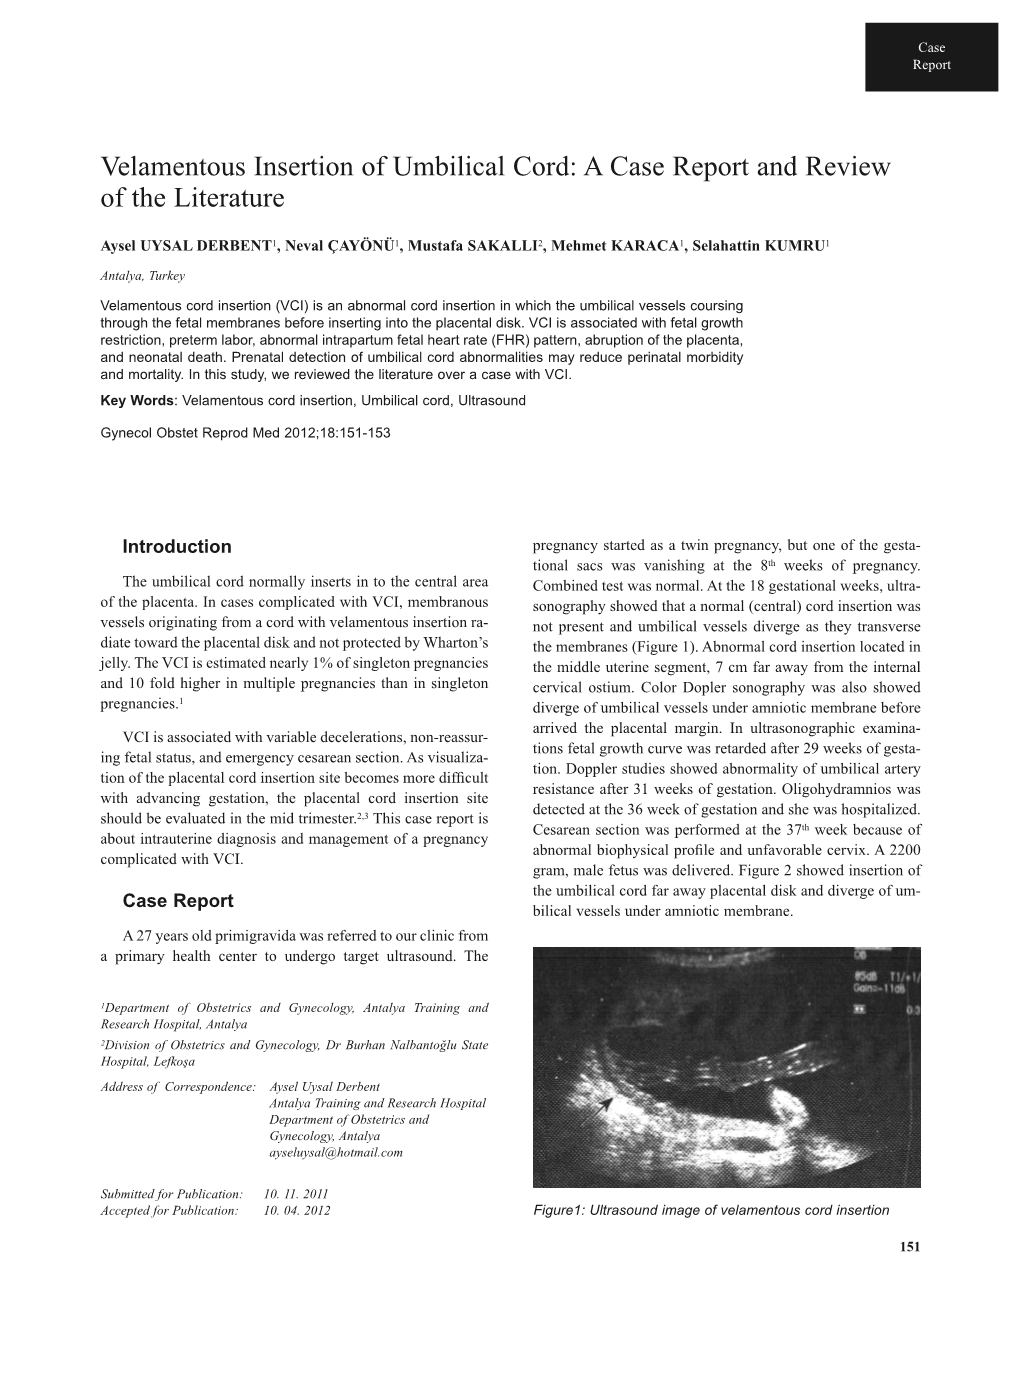 Velamentous Insertion of Umbilical Cord: a Case Report and Review of the Literature